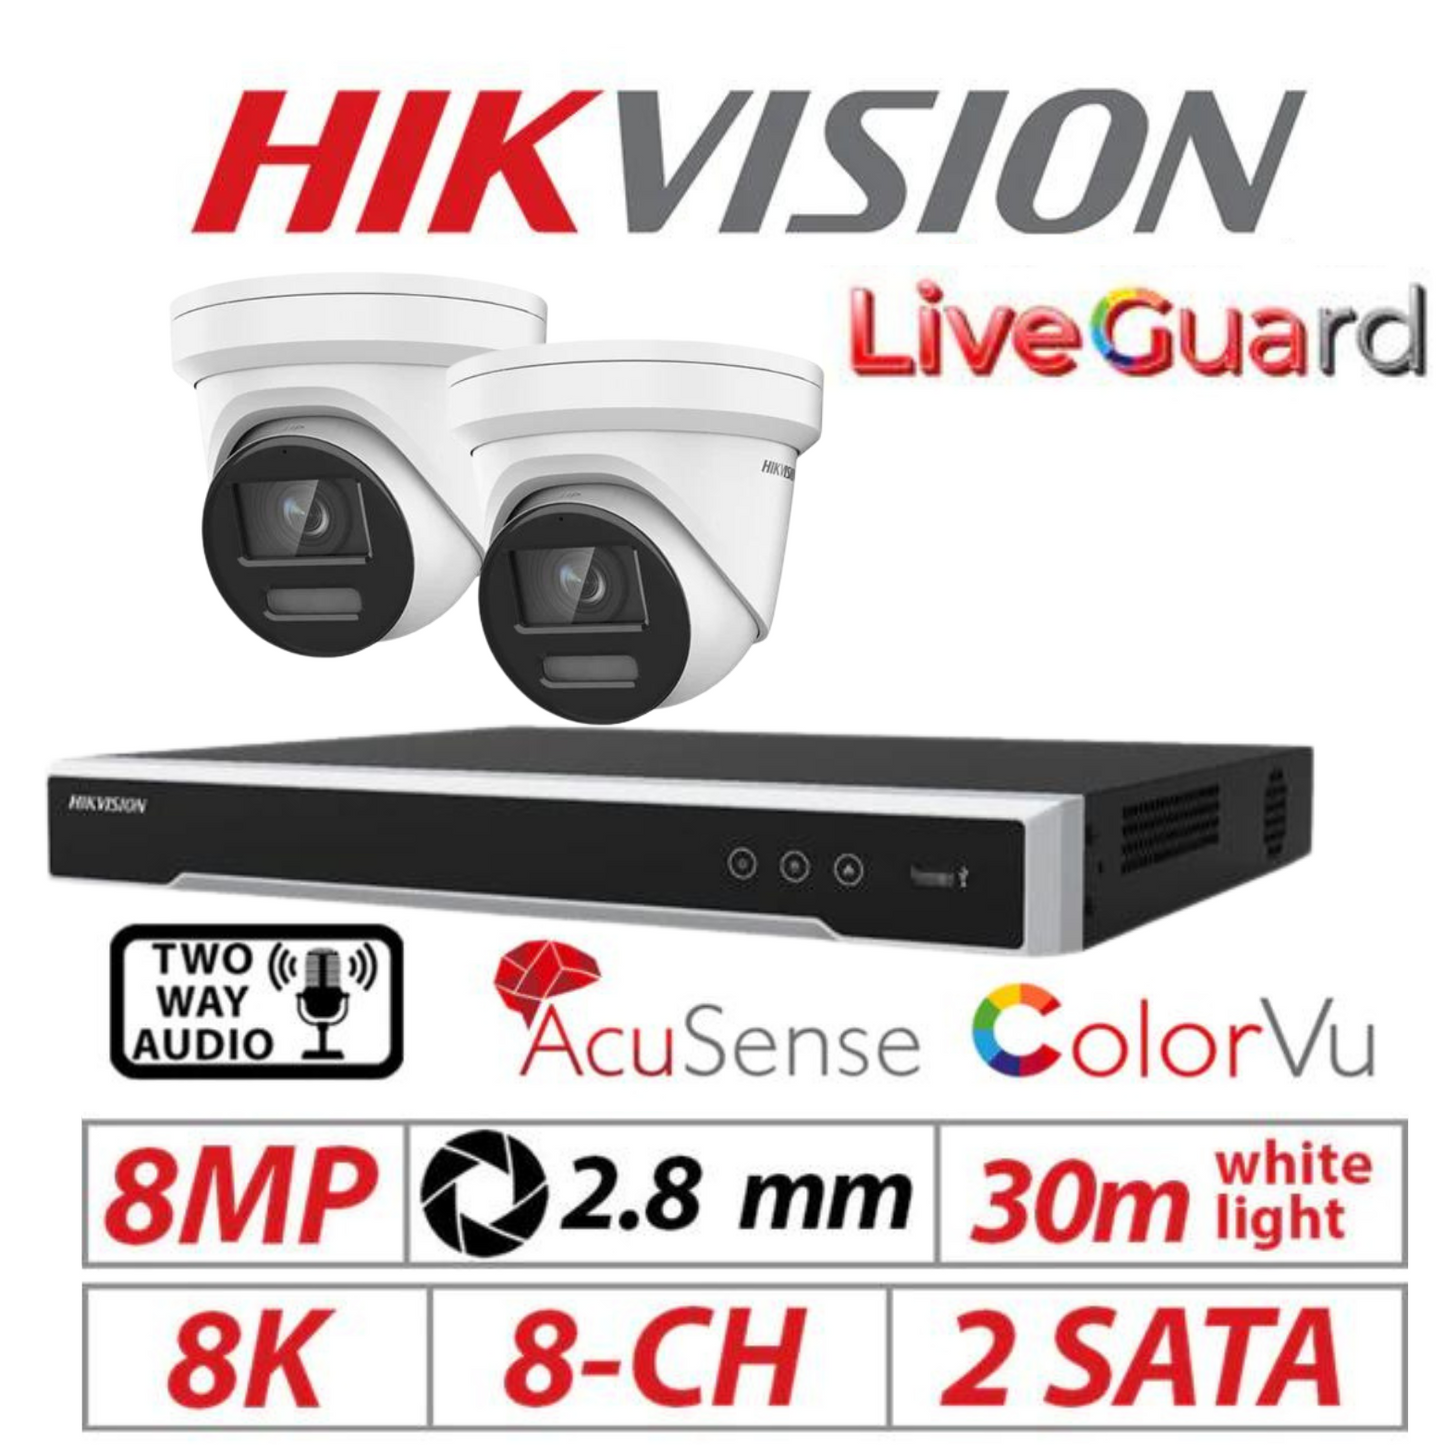 Hikvision CCTV kit, 2 x 8mp Live Guard Colorvu Acusense IP POE and 2 way Audio cameras, 1 x 8 Channel POE NVR